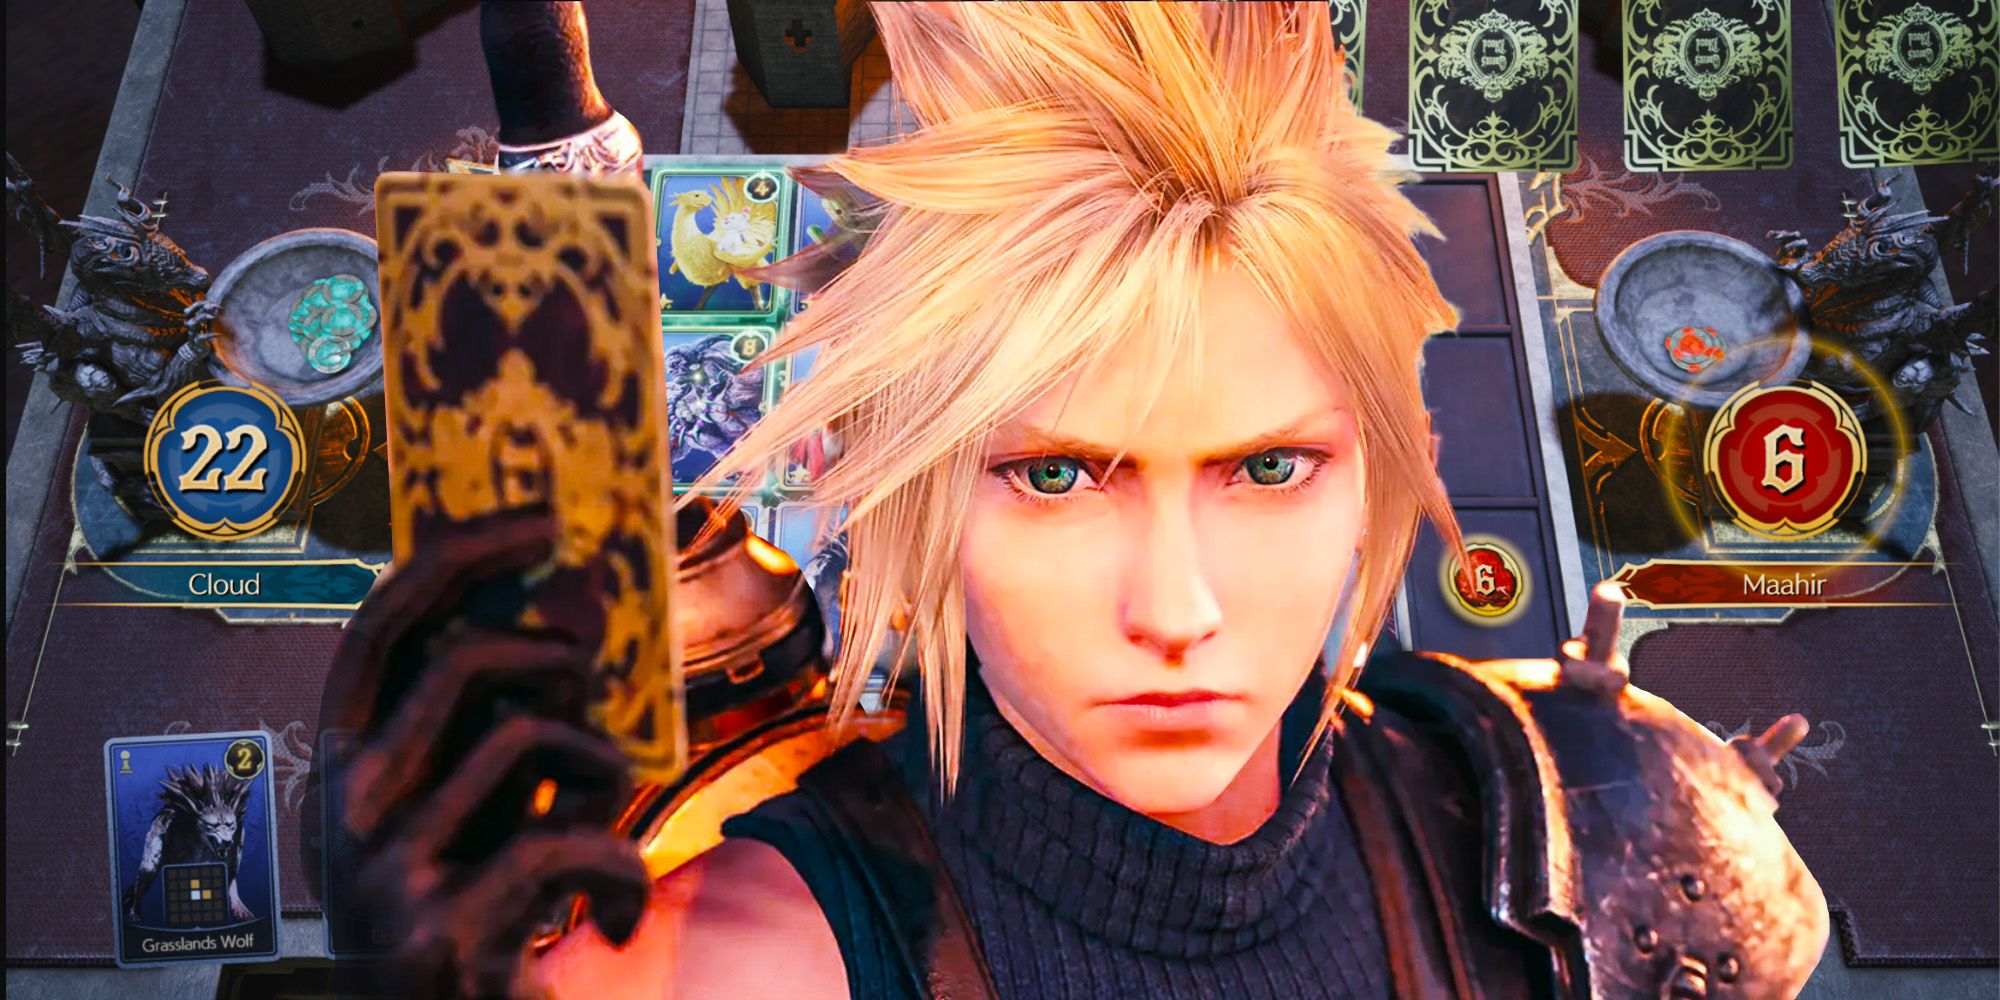 Cloud playing the Queen's blood card game in Final Fantasy 7 Rebirth